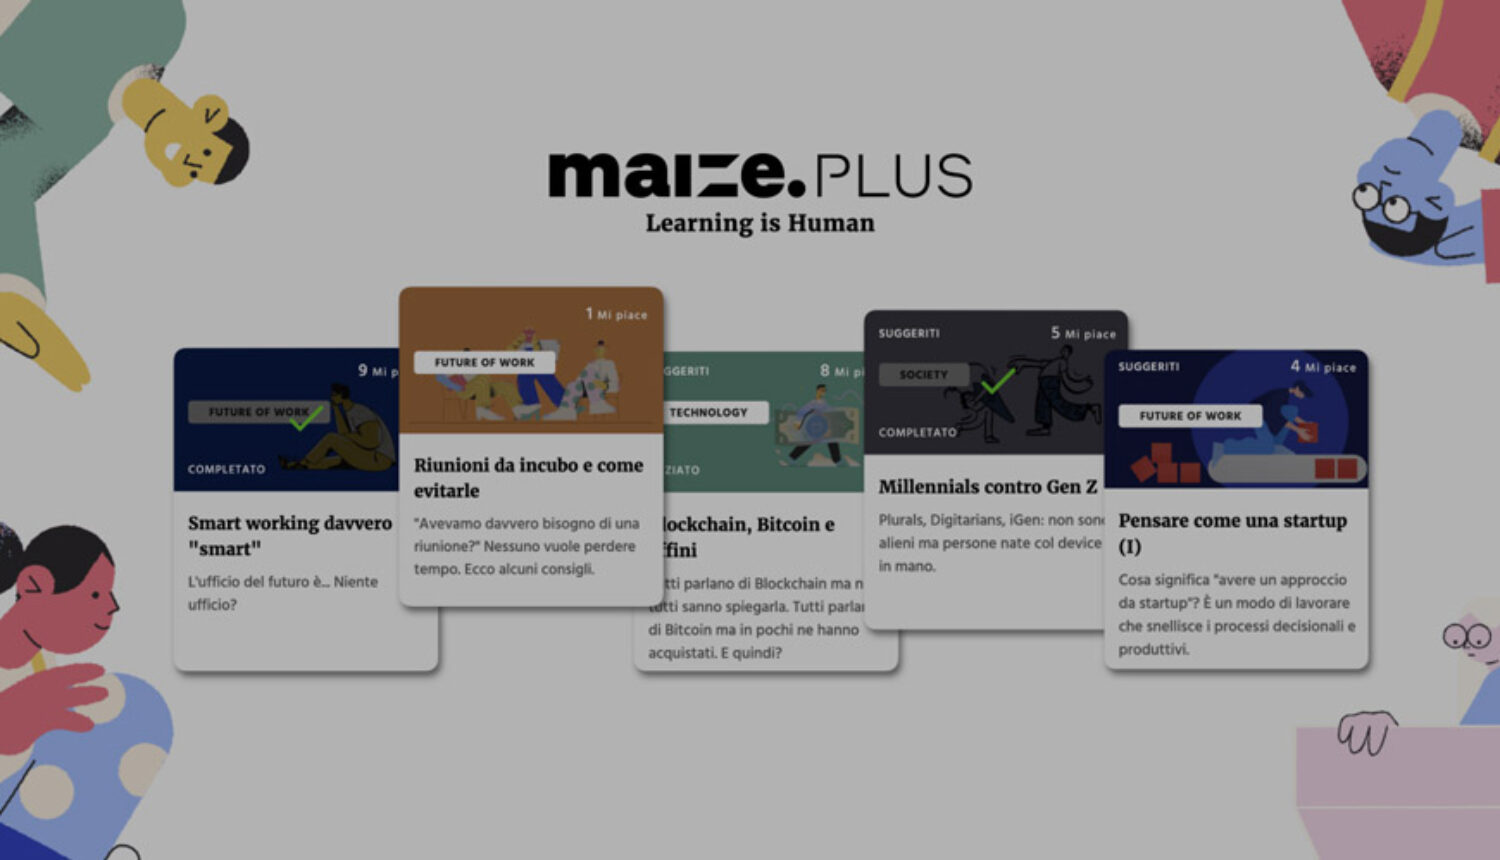 maize.PLUS, our corporate learning platform